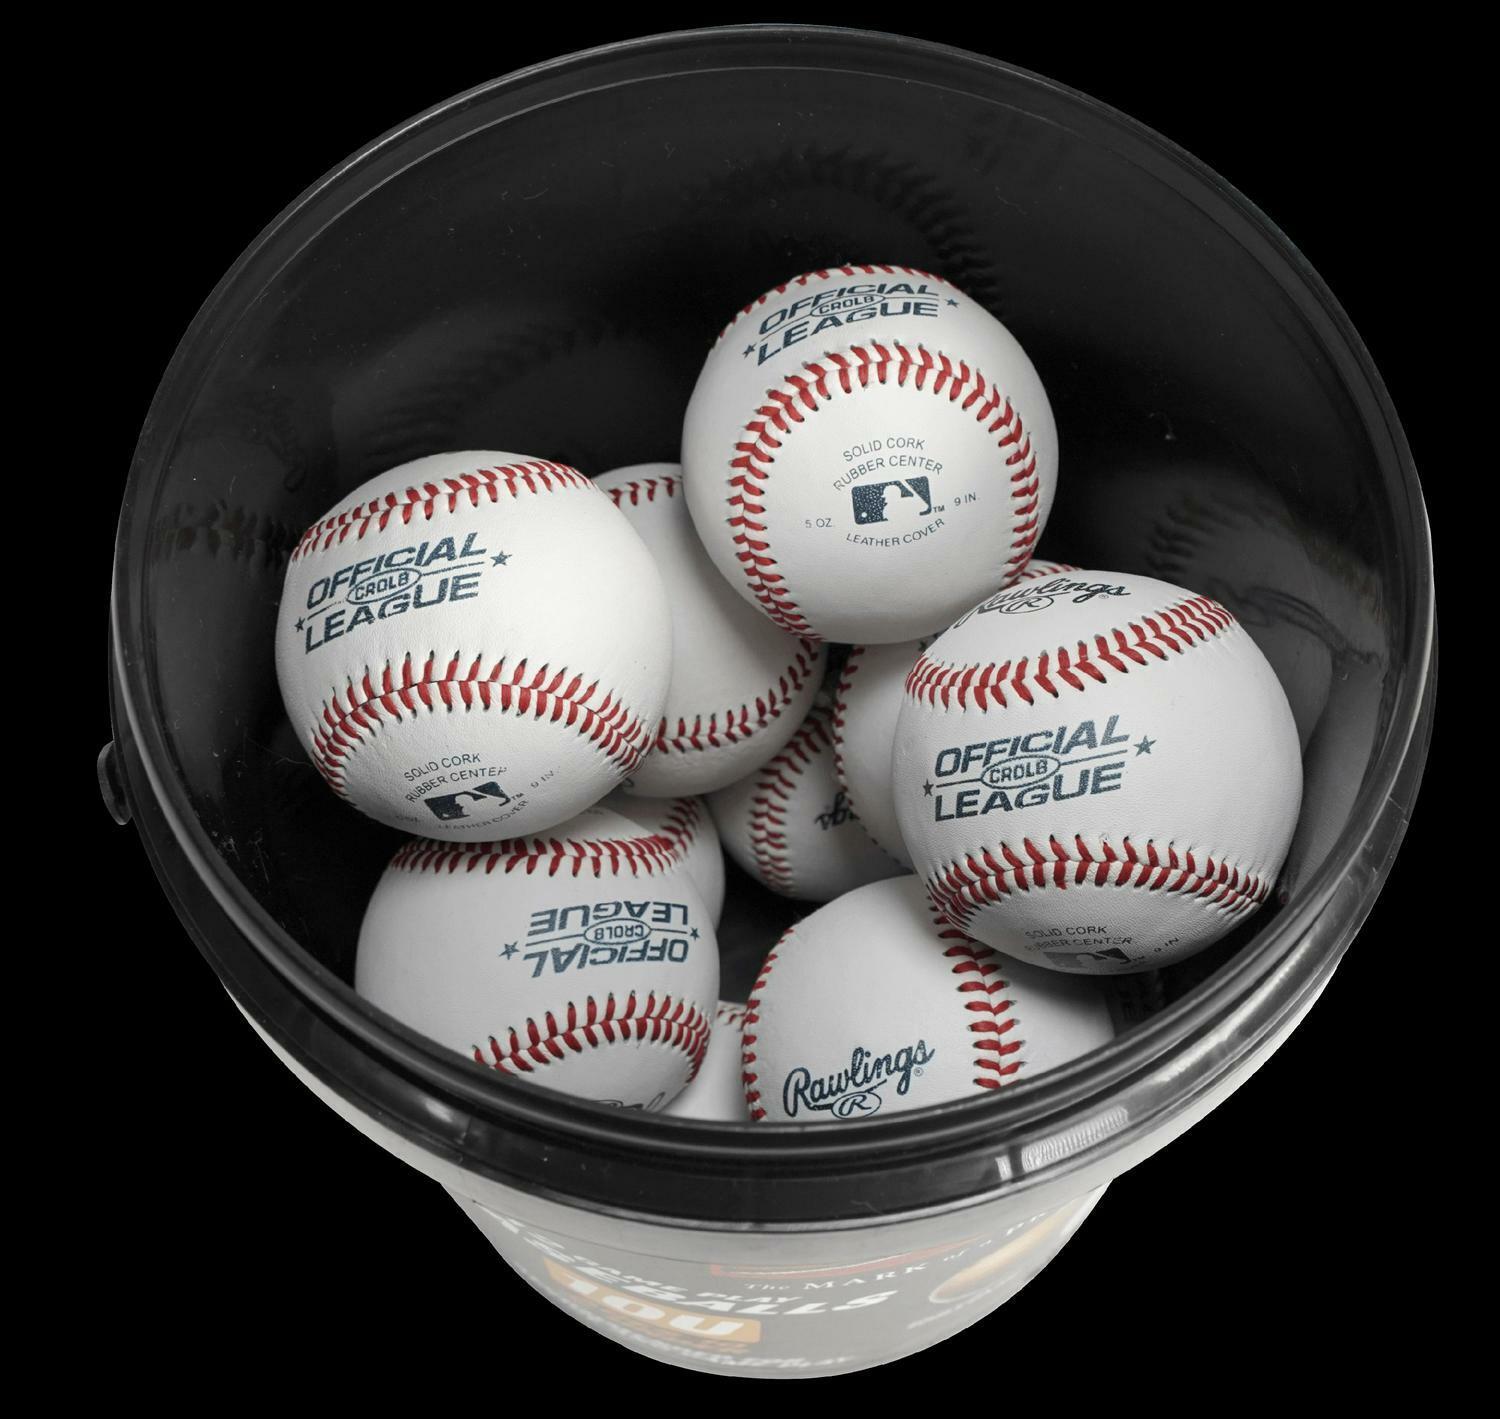 Great Choice Products (12 Pack) Rawlings Bucket Of 10U Official League Crolb Practice Youth Baseballs